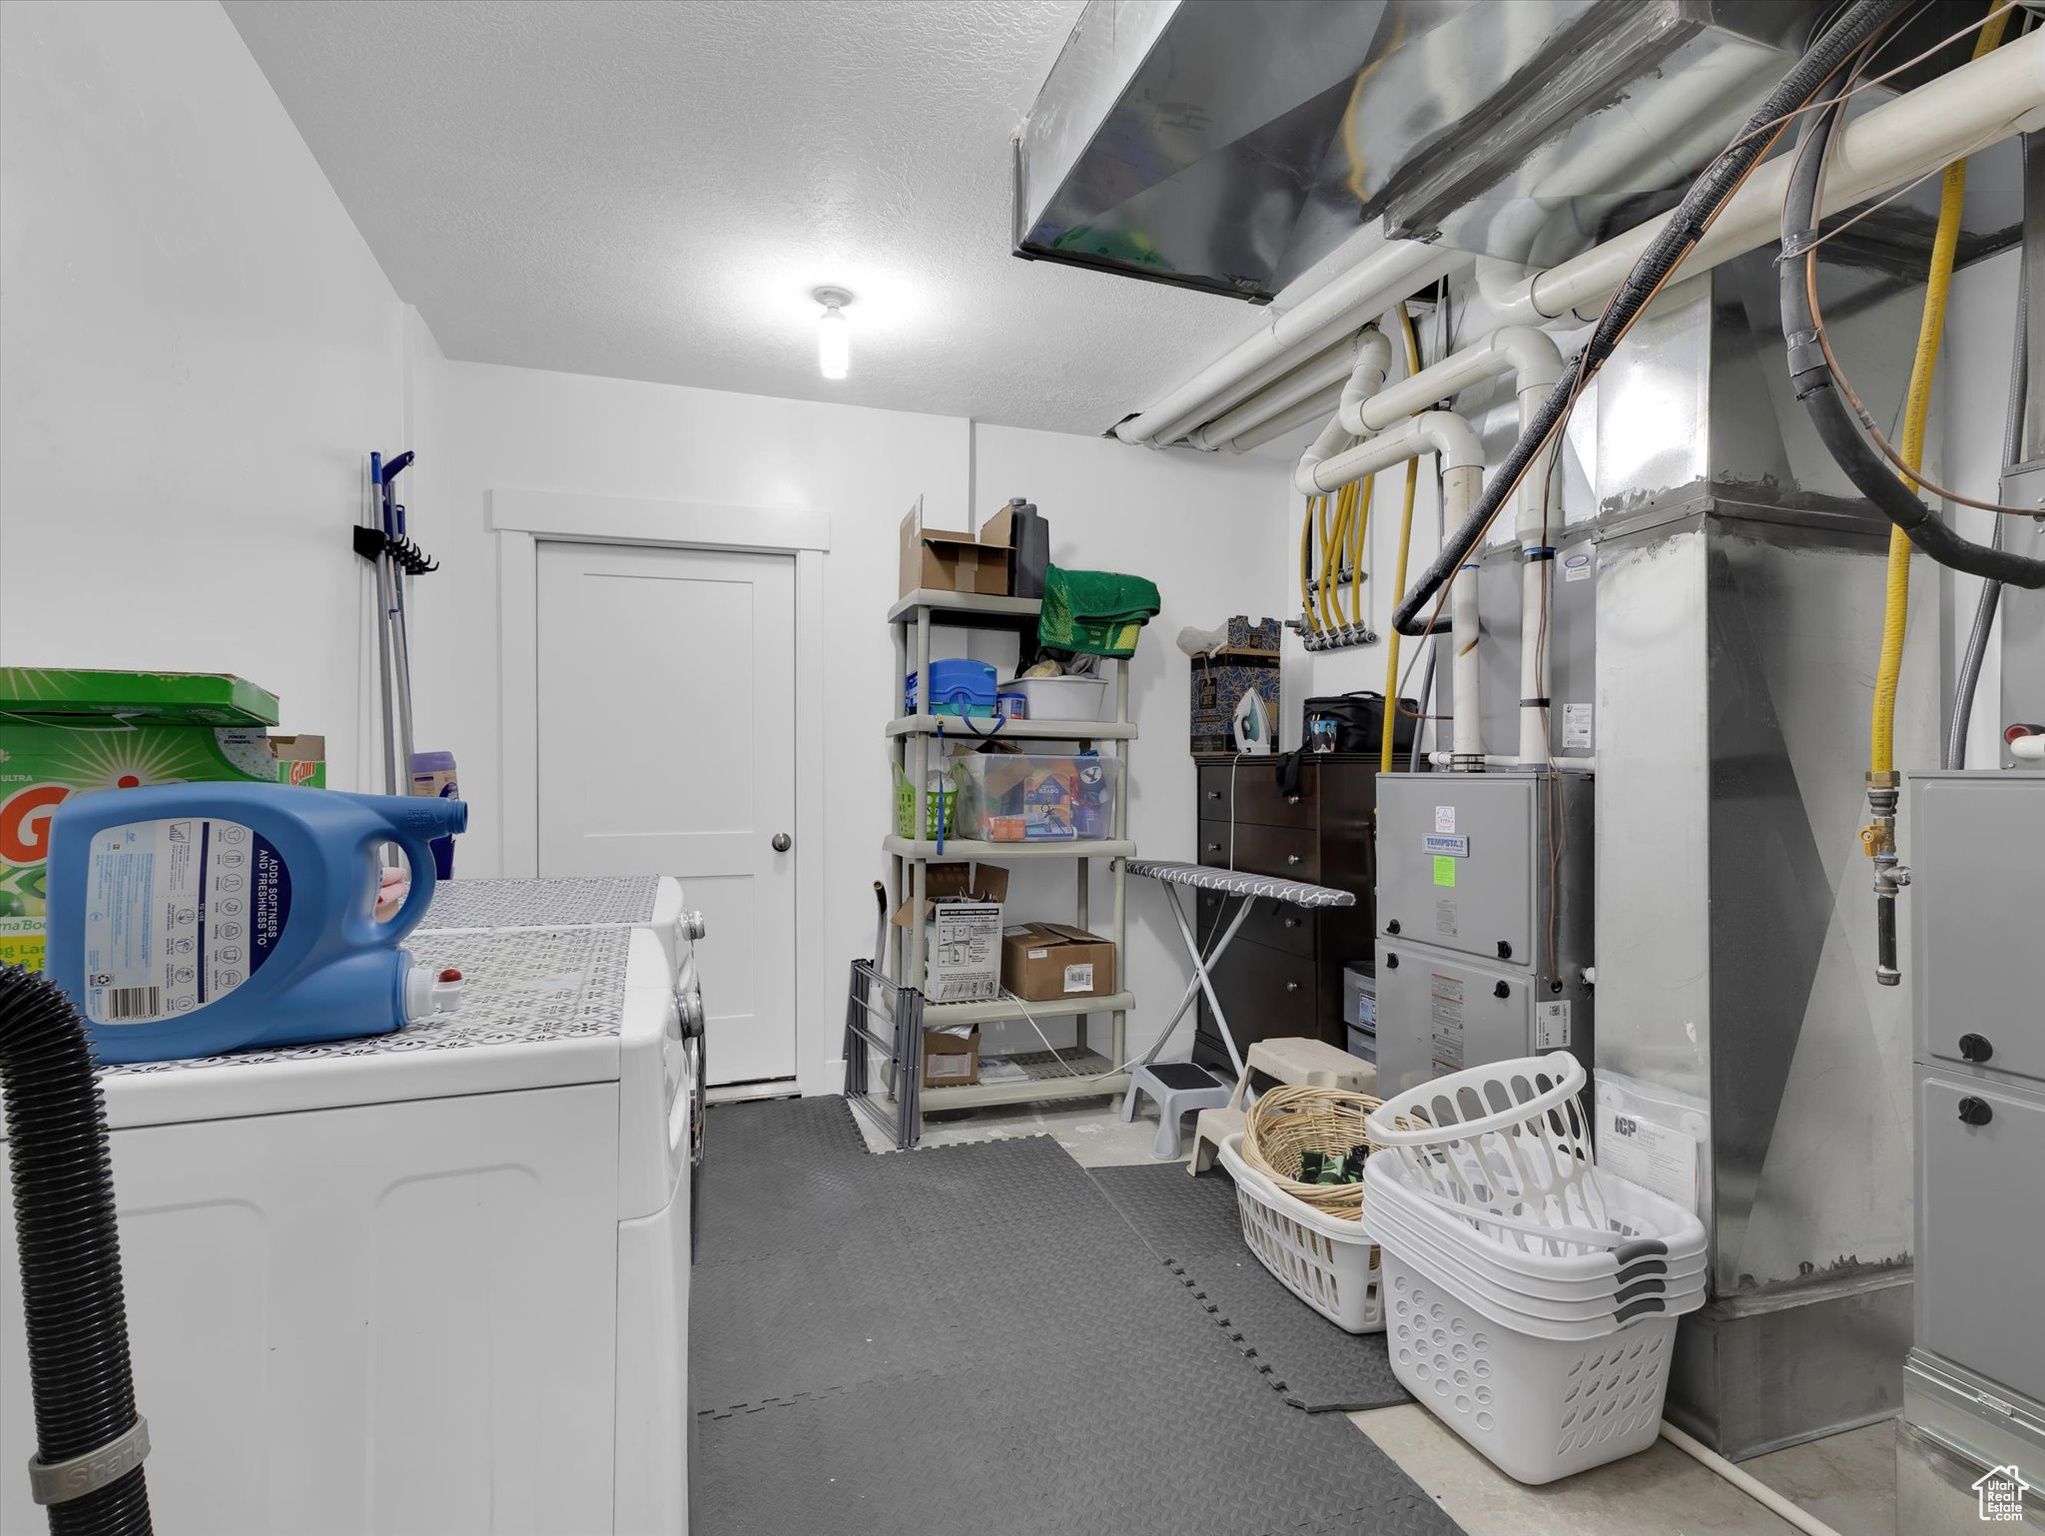 Utility room with second washer/dryer hookups